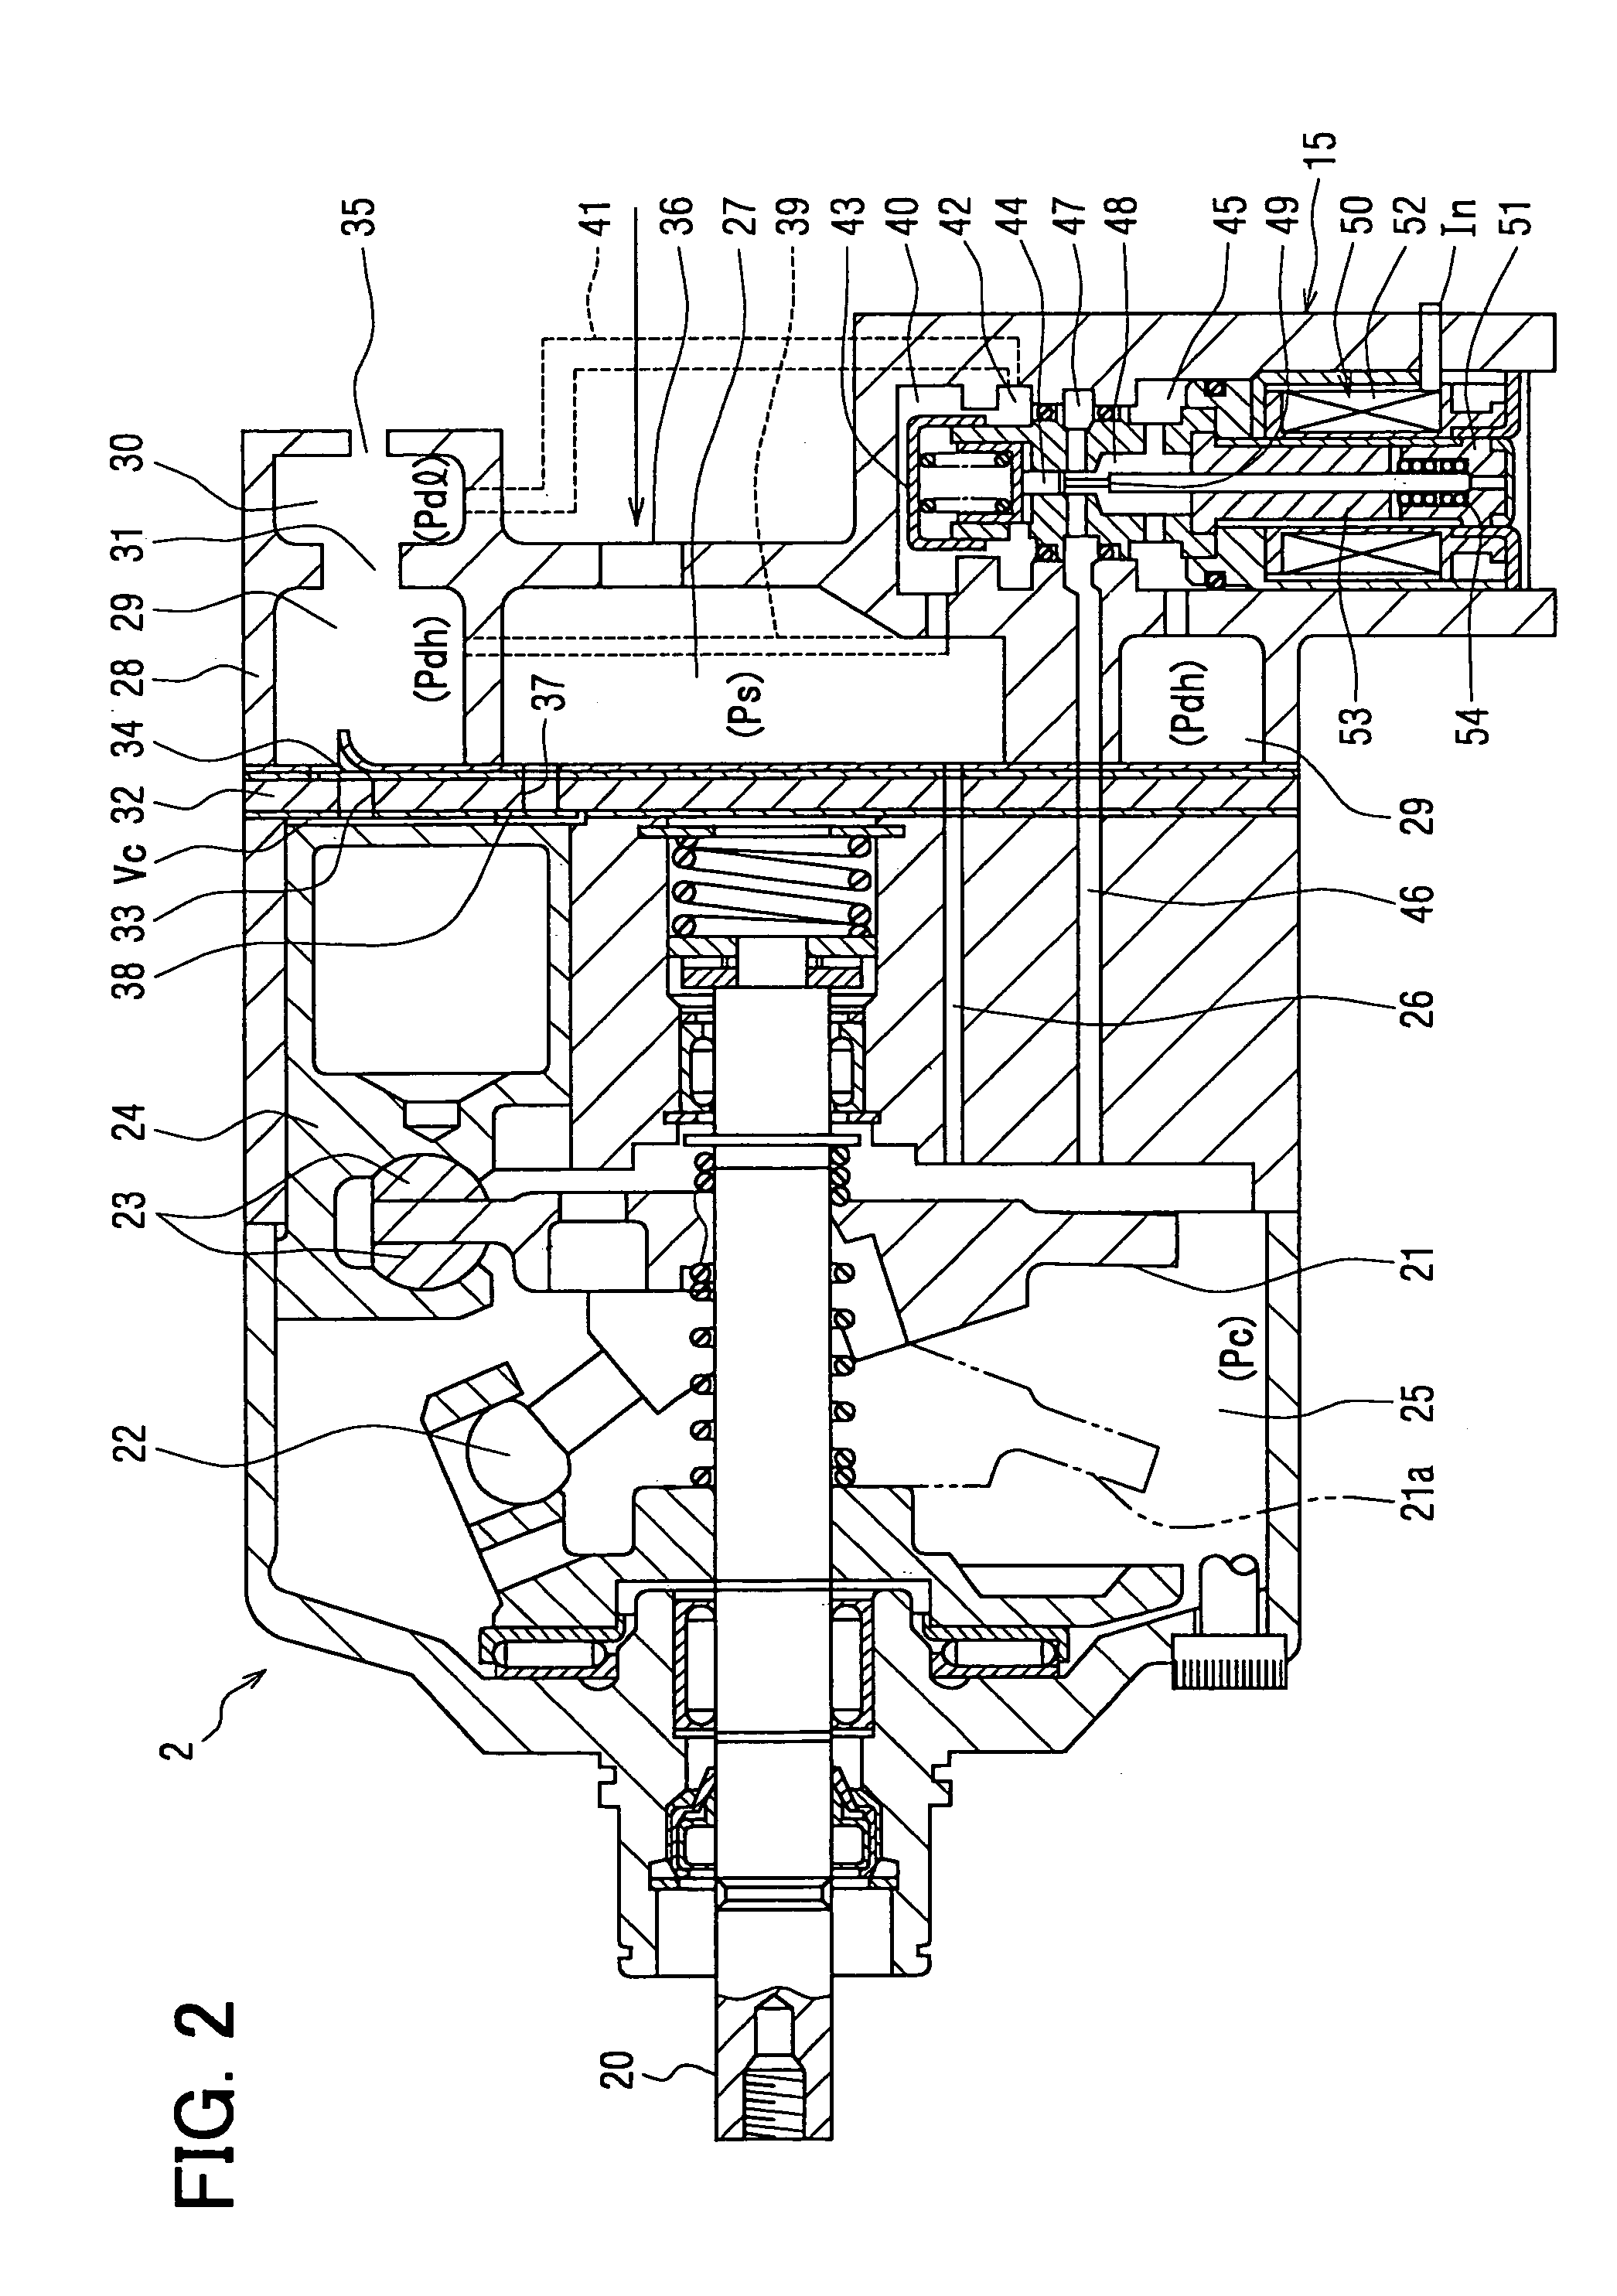 Vehicle air conditioner with discharge capacity control of compressor